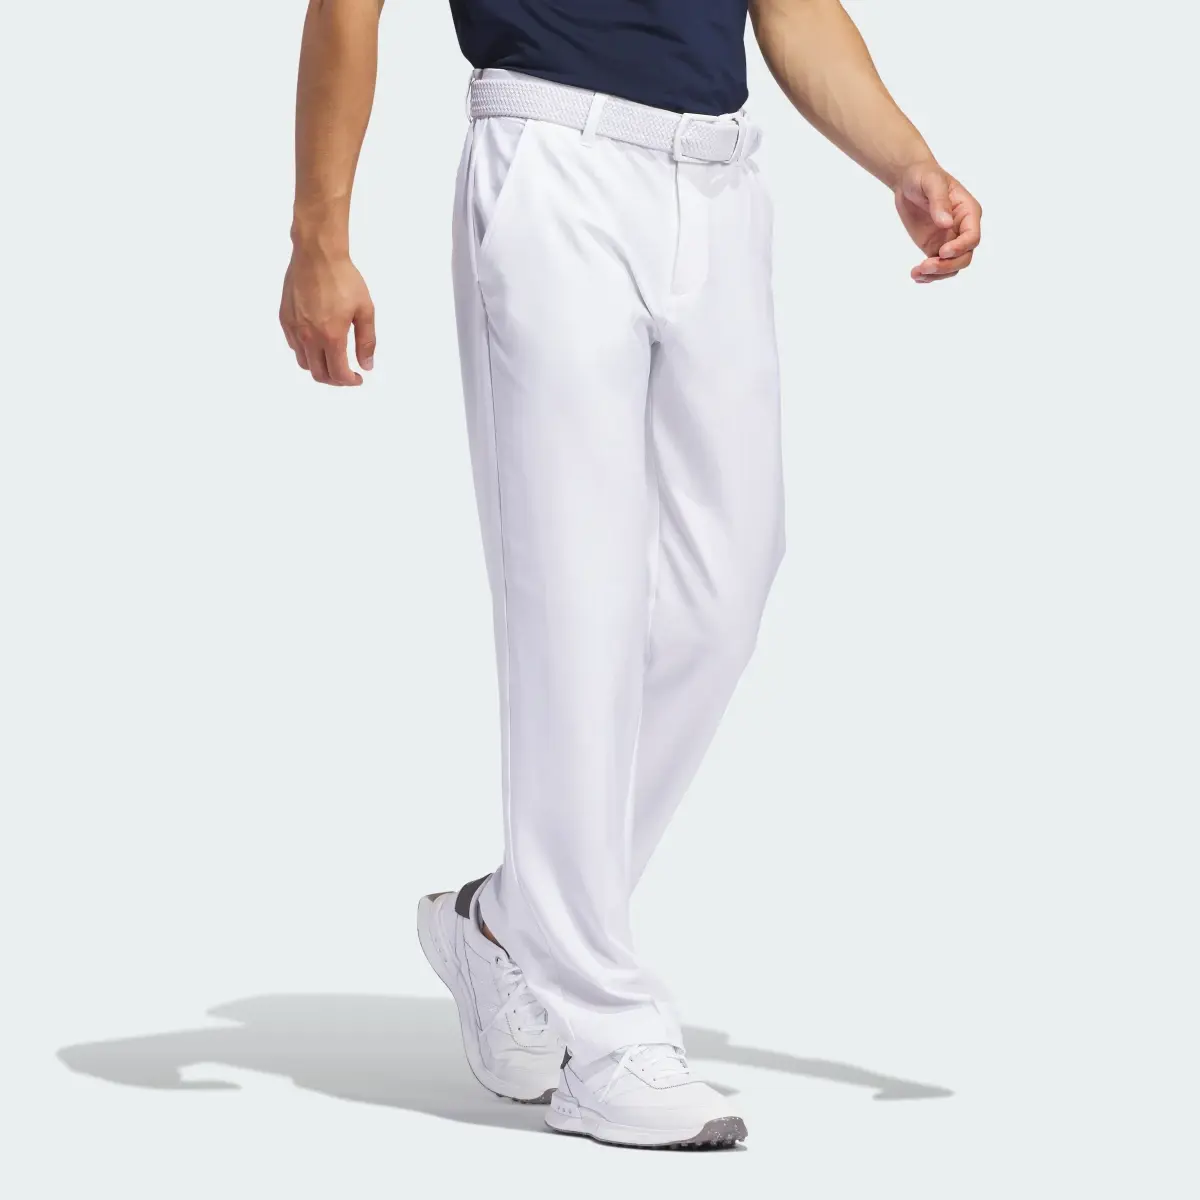 Adidas Ultimate365 Golf Trousers. 3